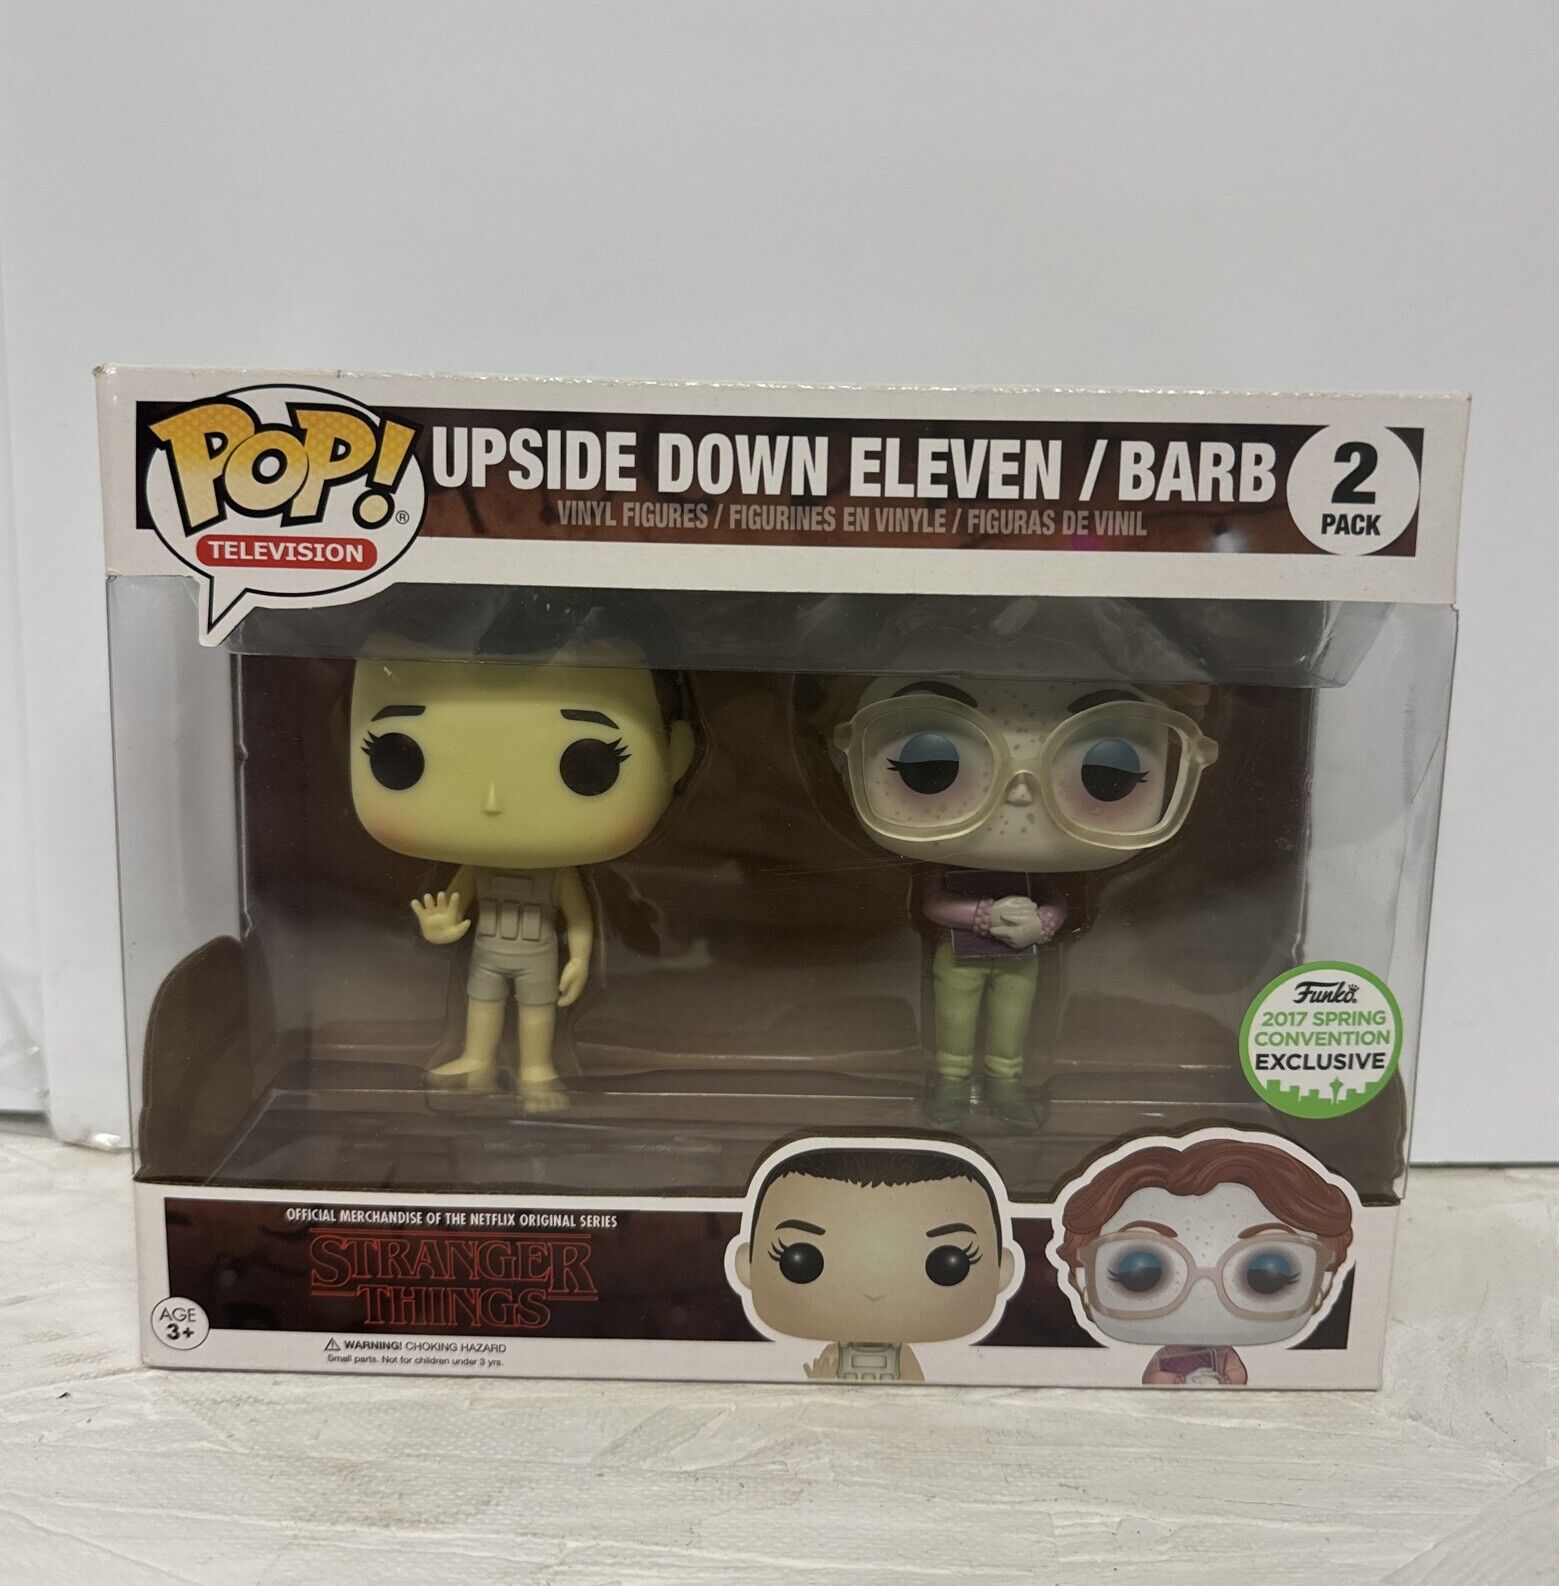 Upside Down Eleven & Barb 2-PK - Pop - 2017 Spring Convention - Stranger Things